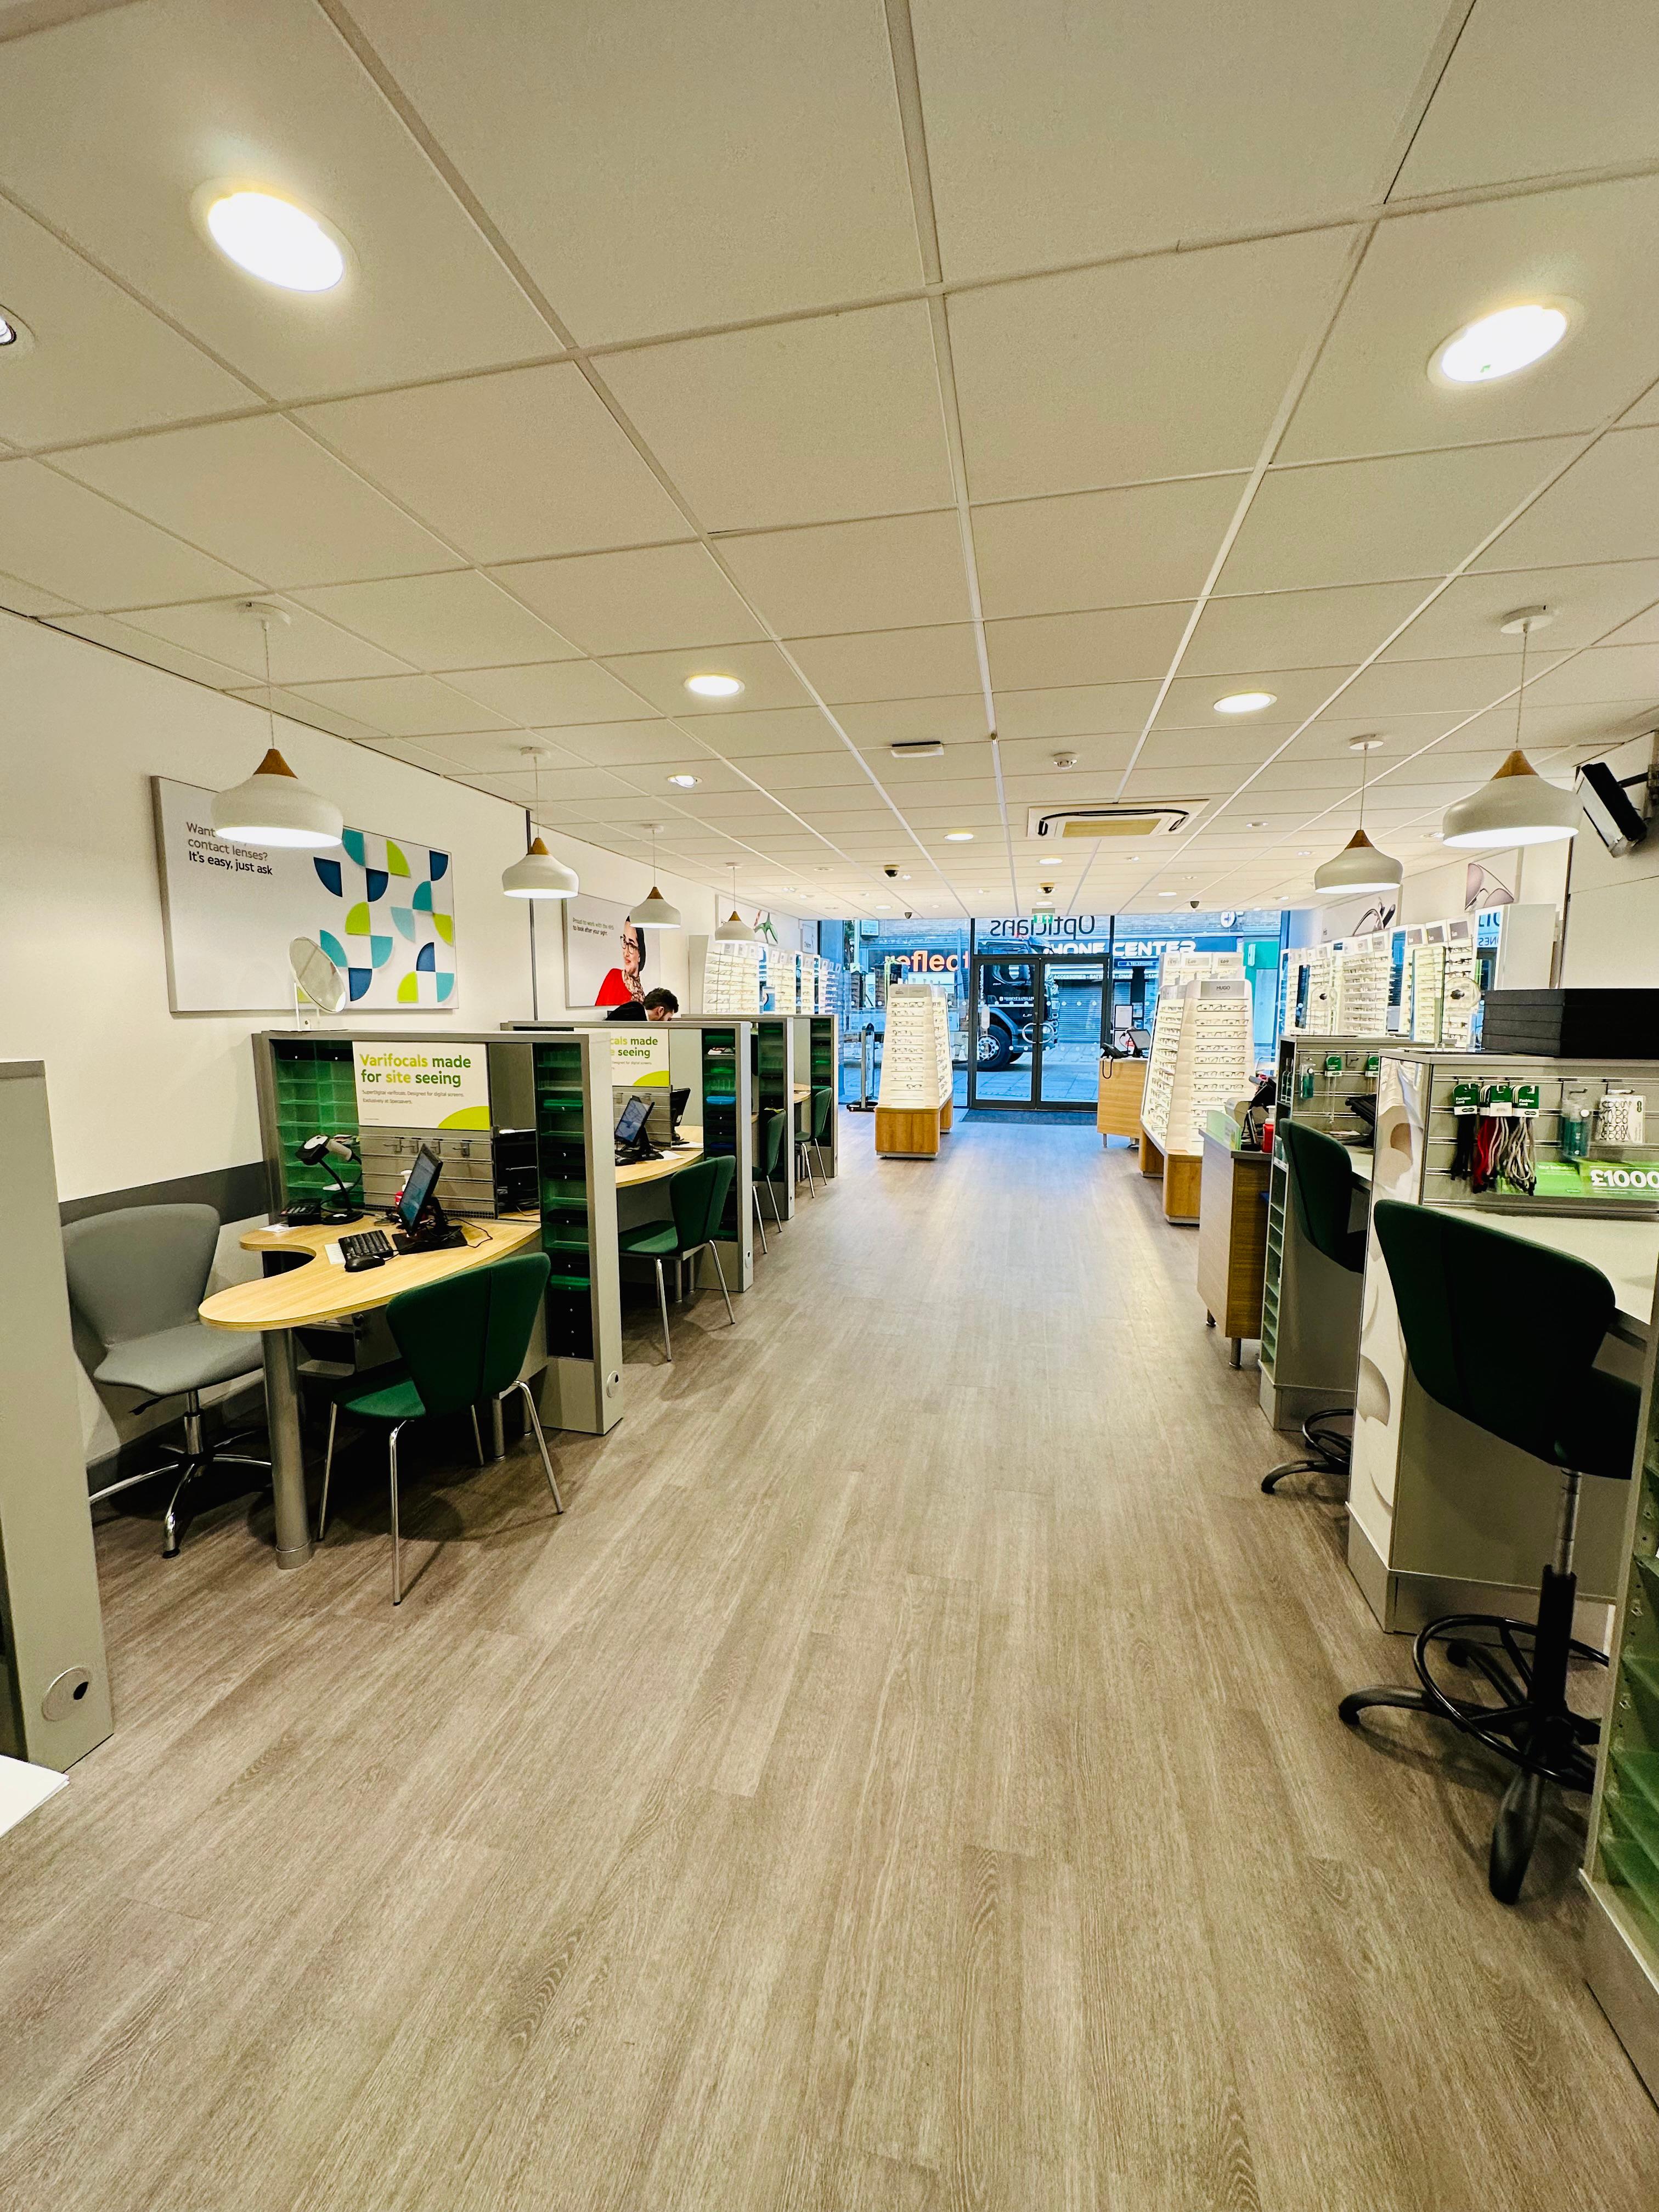 Images Specsavers Opticians and Audiologists - Croydon North End